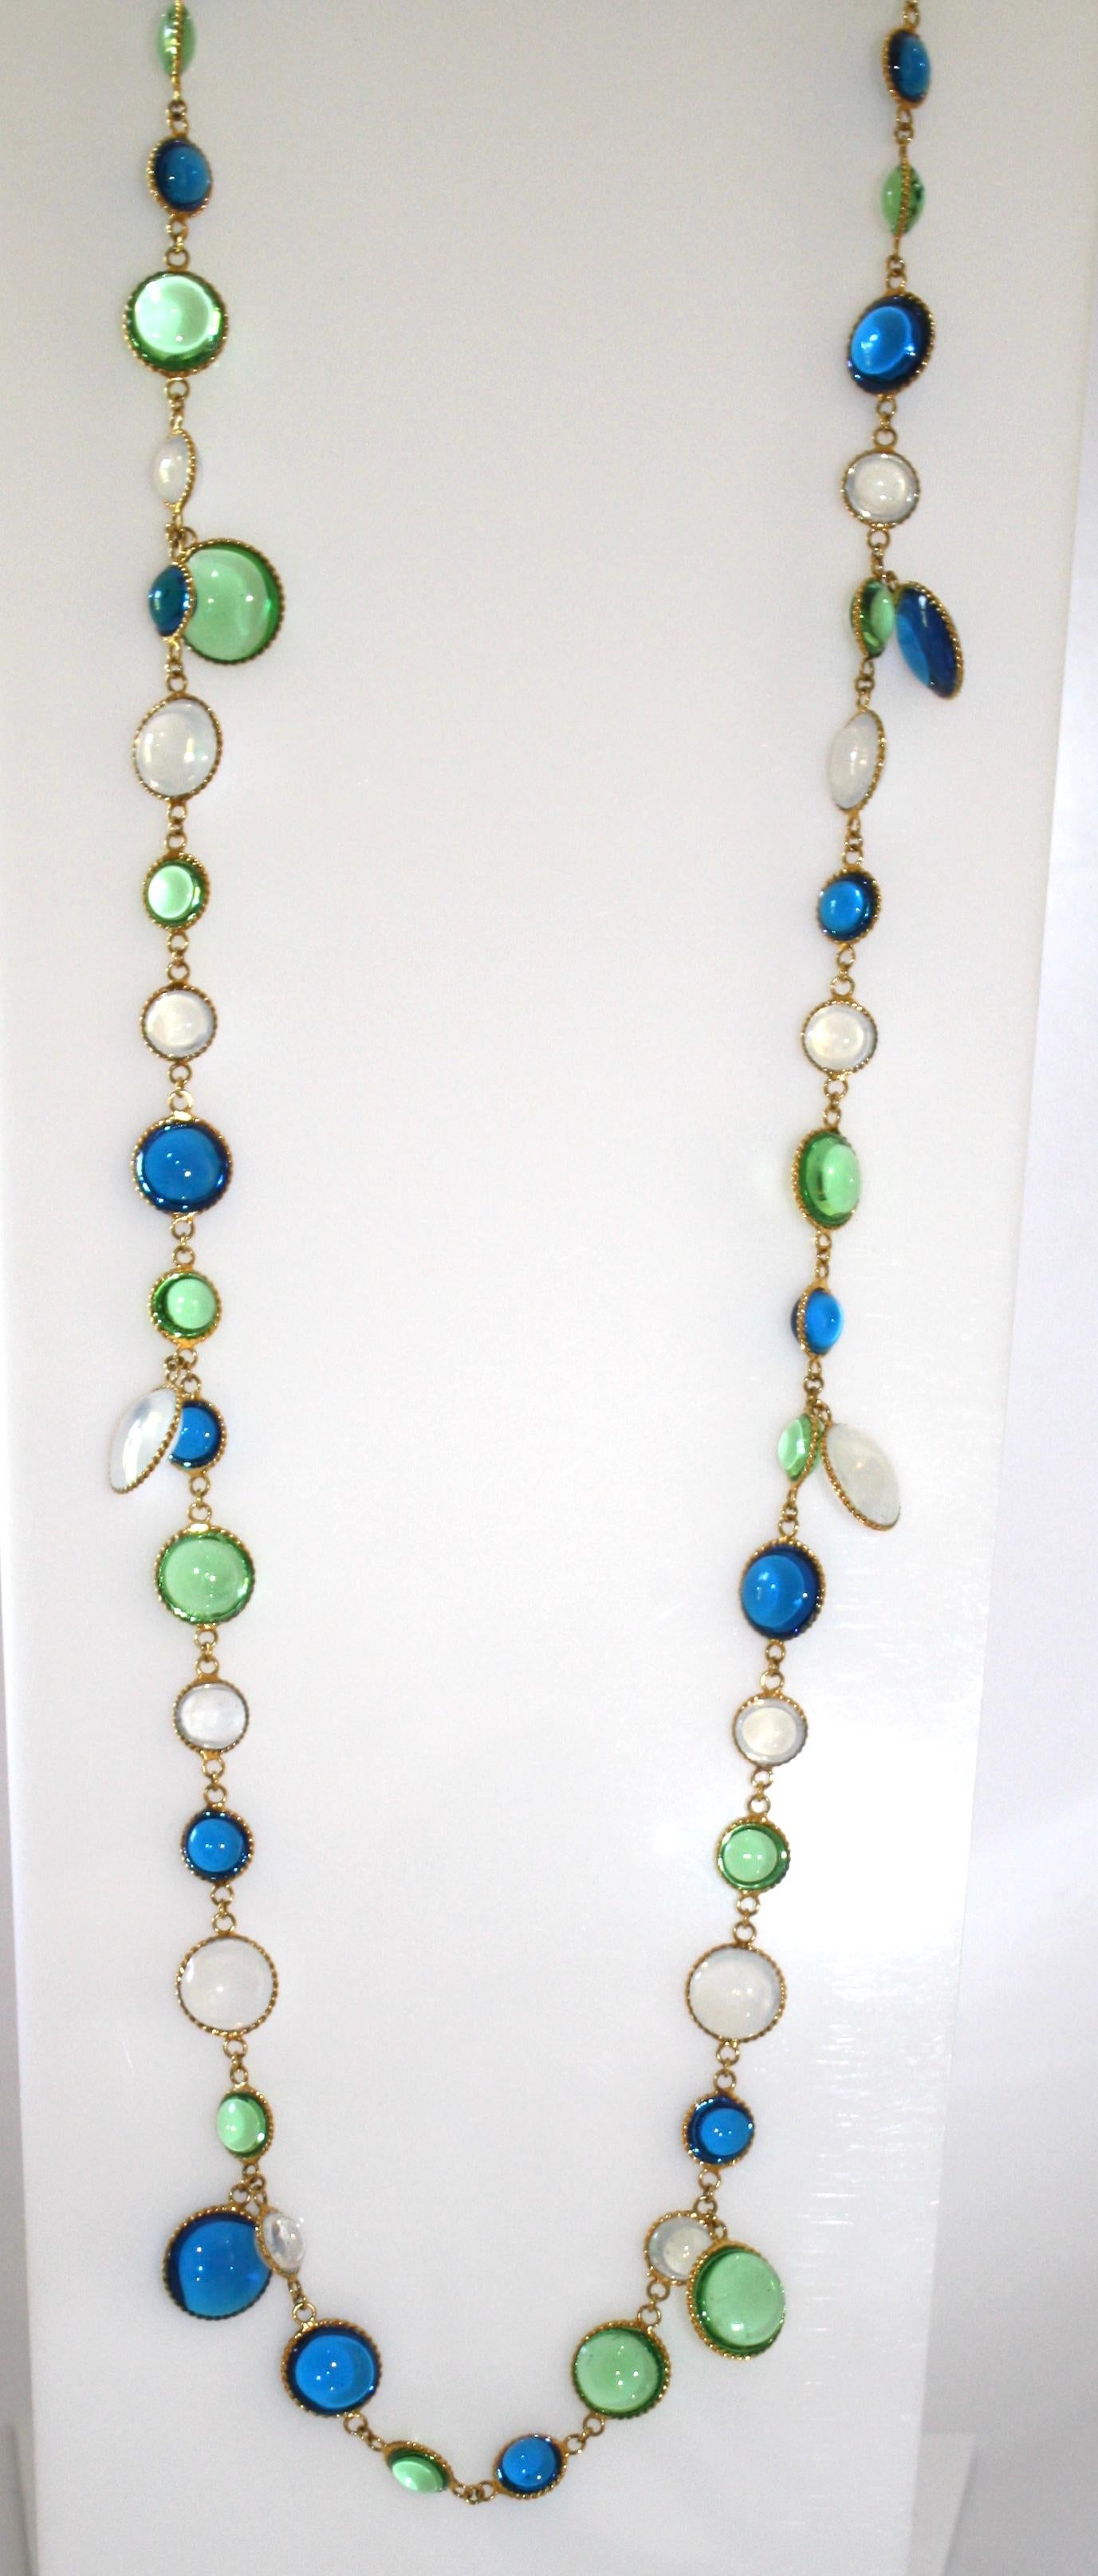 Hand poured glass necklace made in Paris, France. 